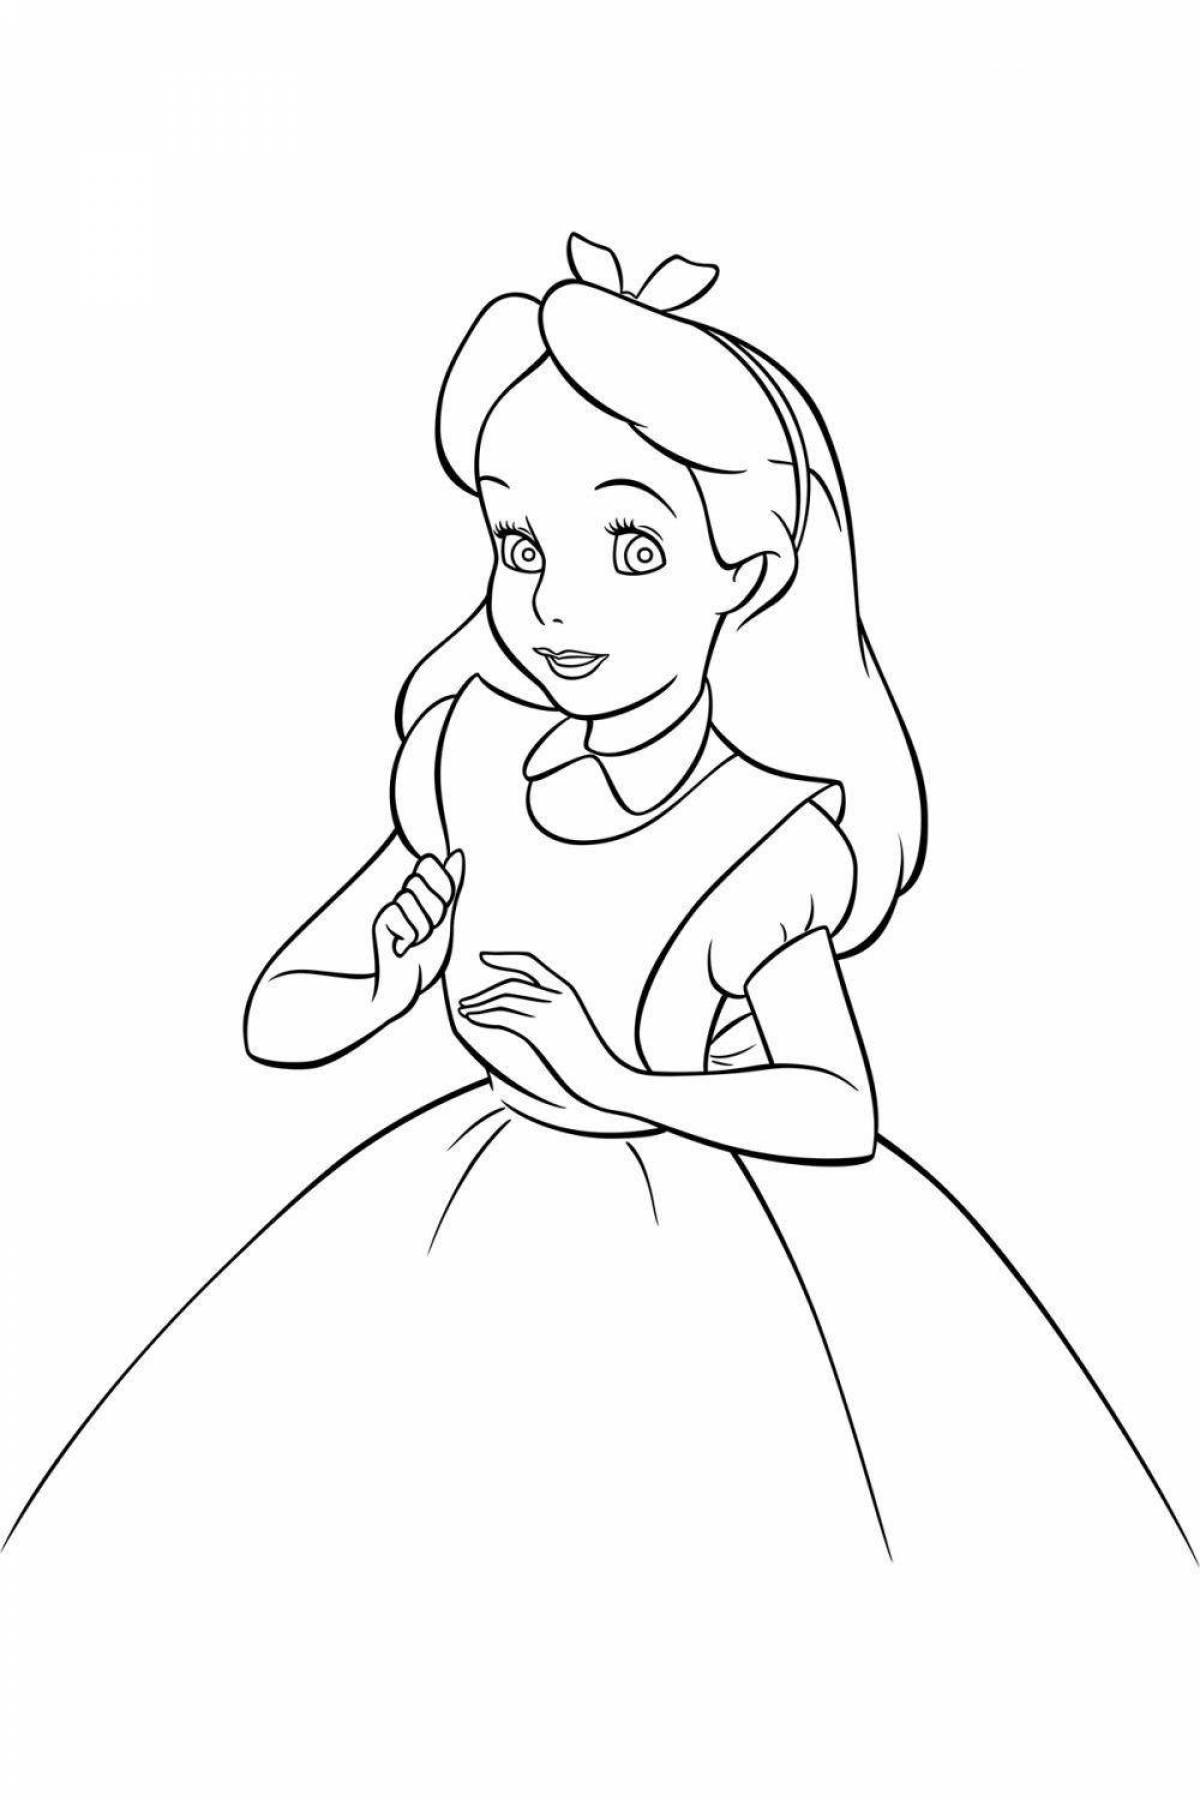 Enthusiastic Alice finds a coloring book